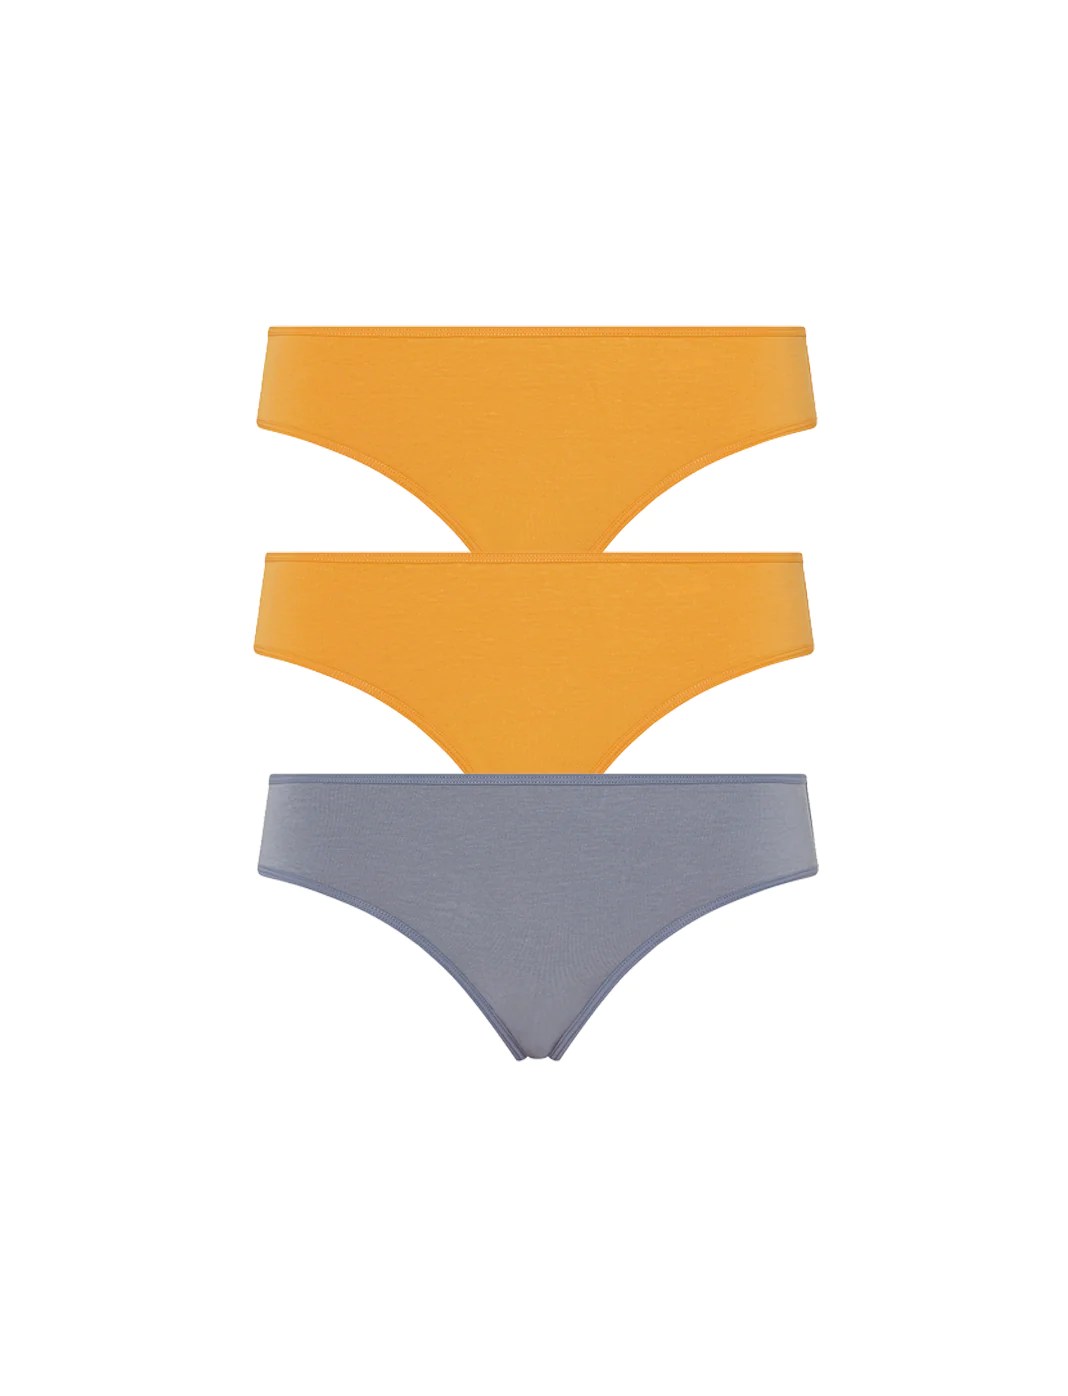 thirdlove hipster underwear bundle, all gynecologist approved